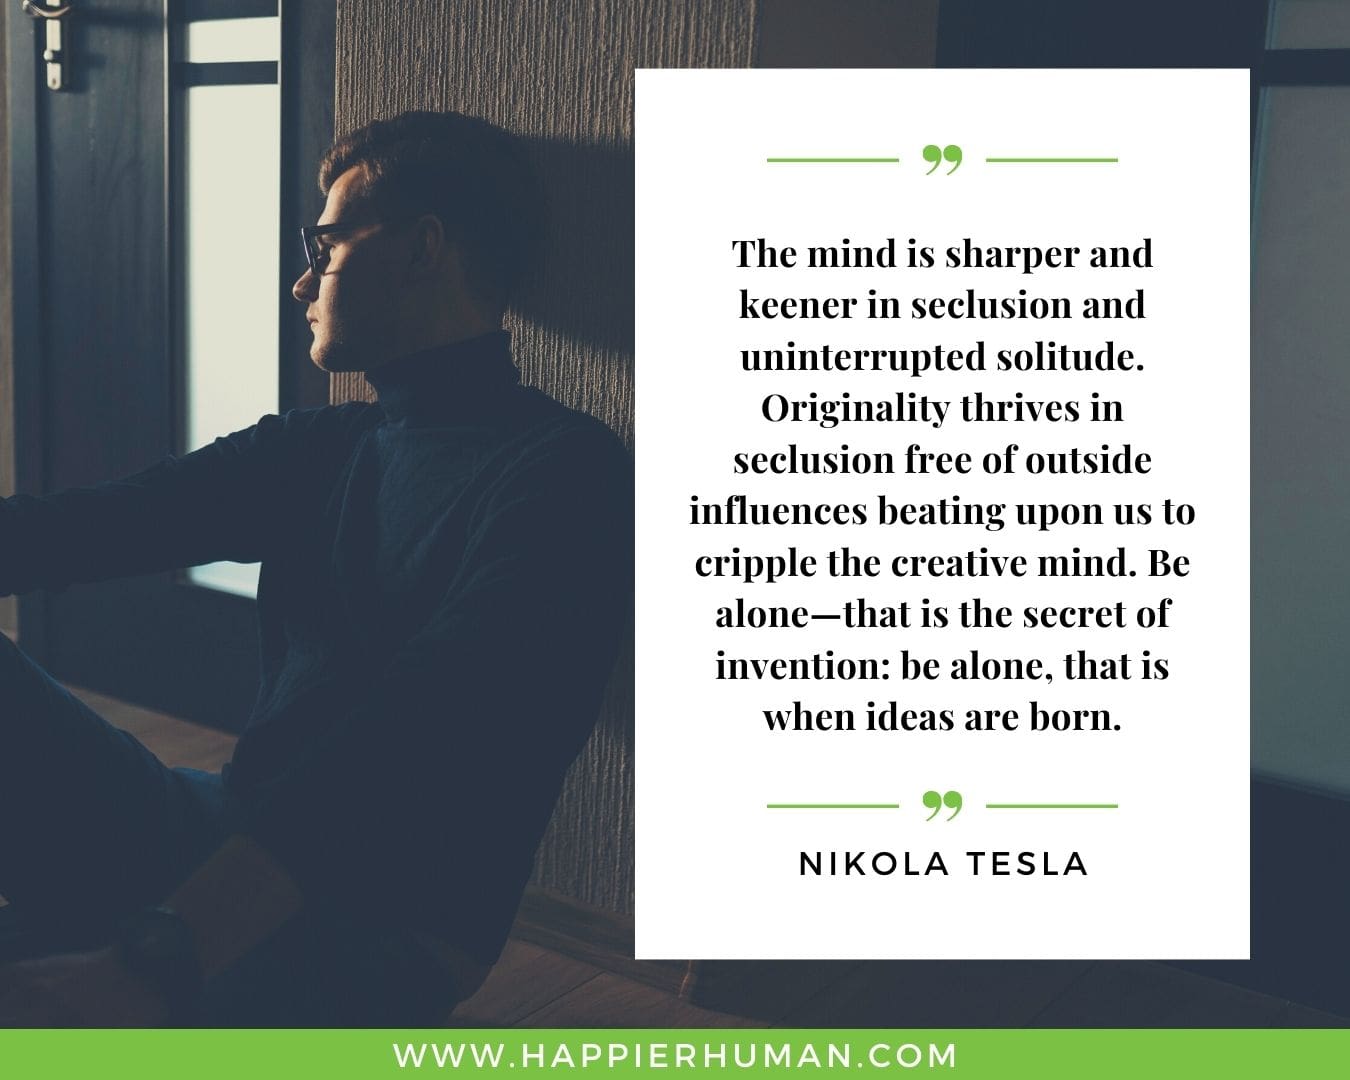 Loneliness Quotes - “The mind is sharper and keener in seclusion and uninterrupted solitude. Originality thrives in seclusion free of outside influences beating upon us to cripple the creative mind. Be alone—that is the secret of invention: be alone, that is when ideas are born.” – Nikola Tesla